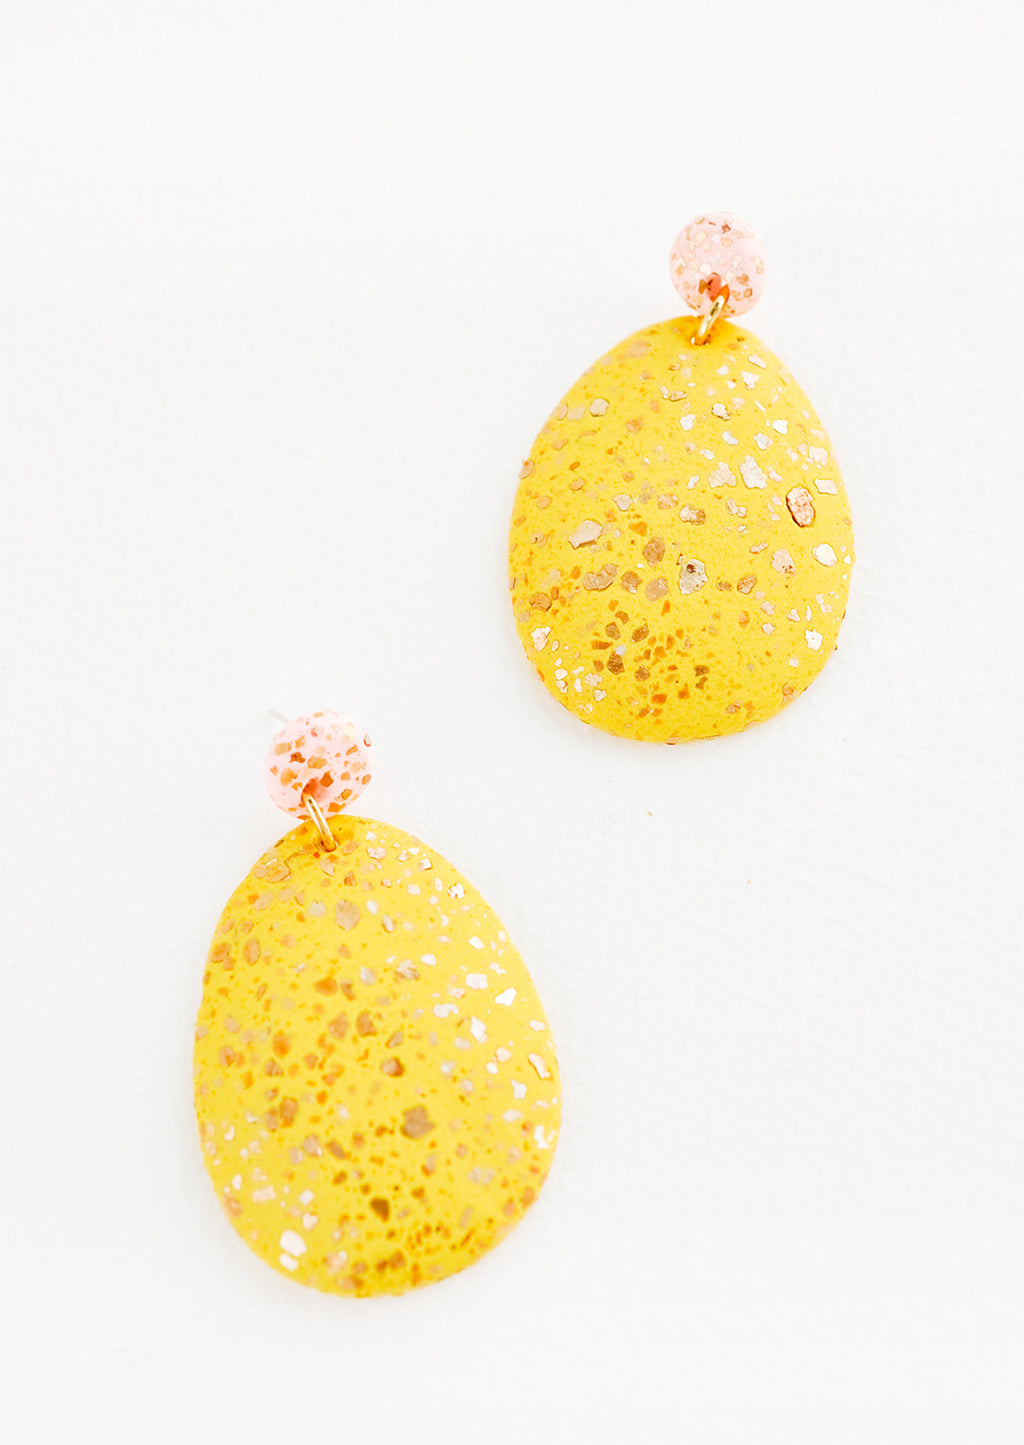 Pollen / Blush: Dangling glitter covered earrings, with a yellow larger oval dangling from a small pink bead.